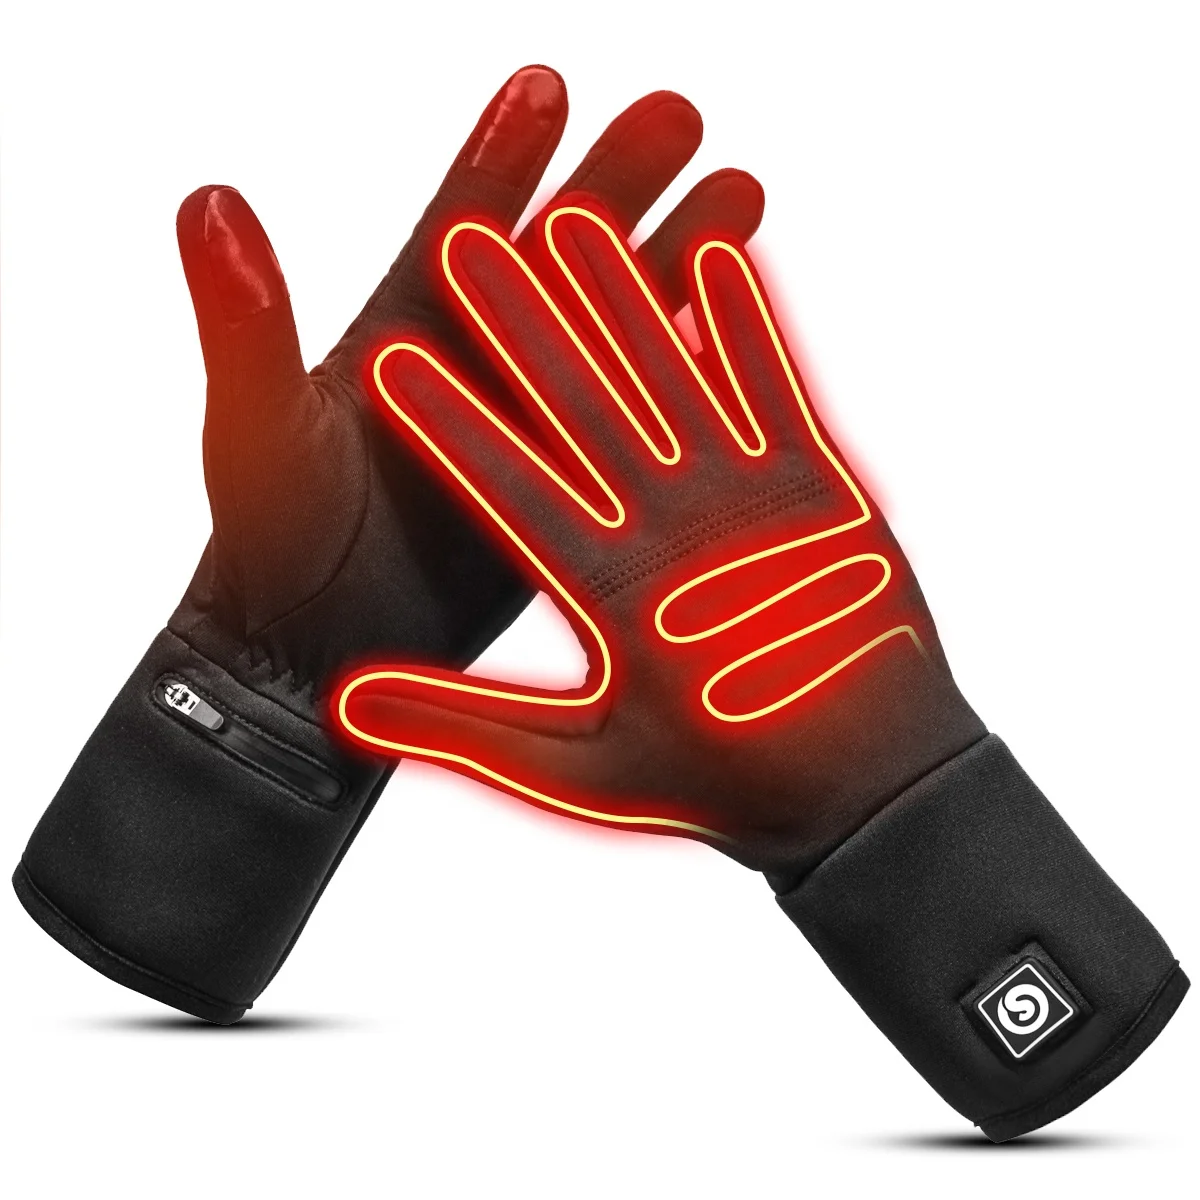 

Rechargeable Battery Motorcycle Ski Snow Warmer Mitten Glove Arthritis Heated Glove Liners for Men Women, Black or customized